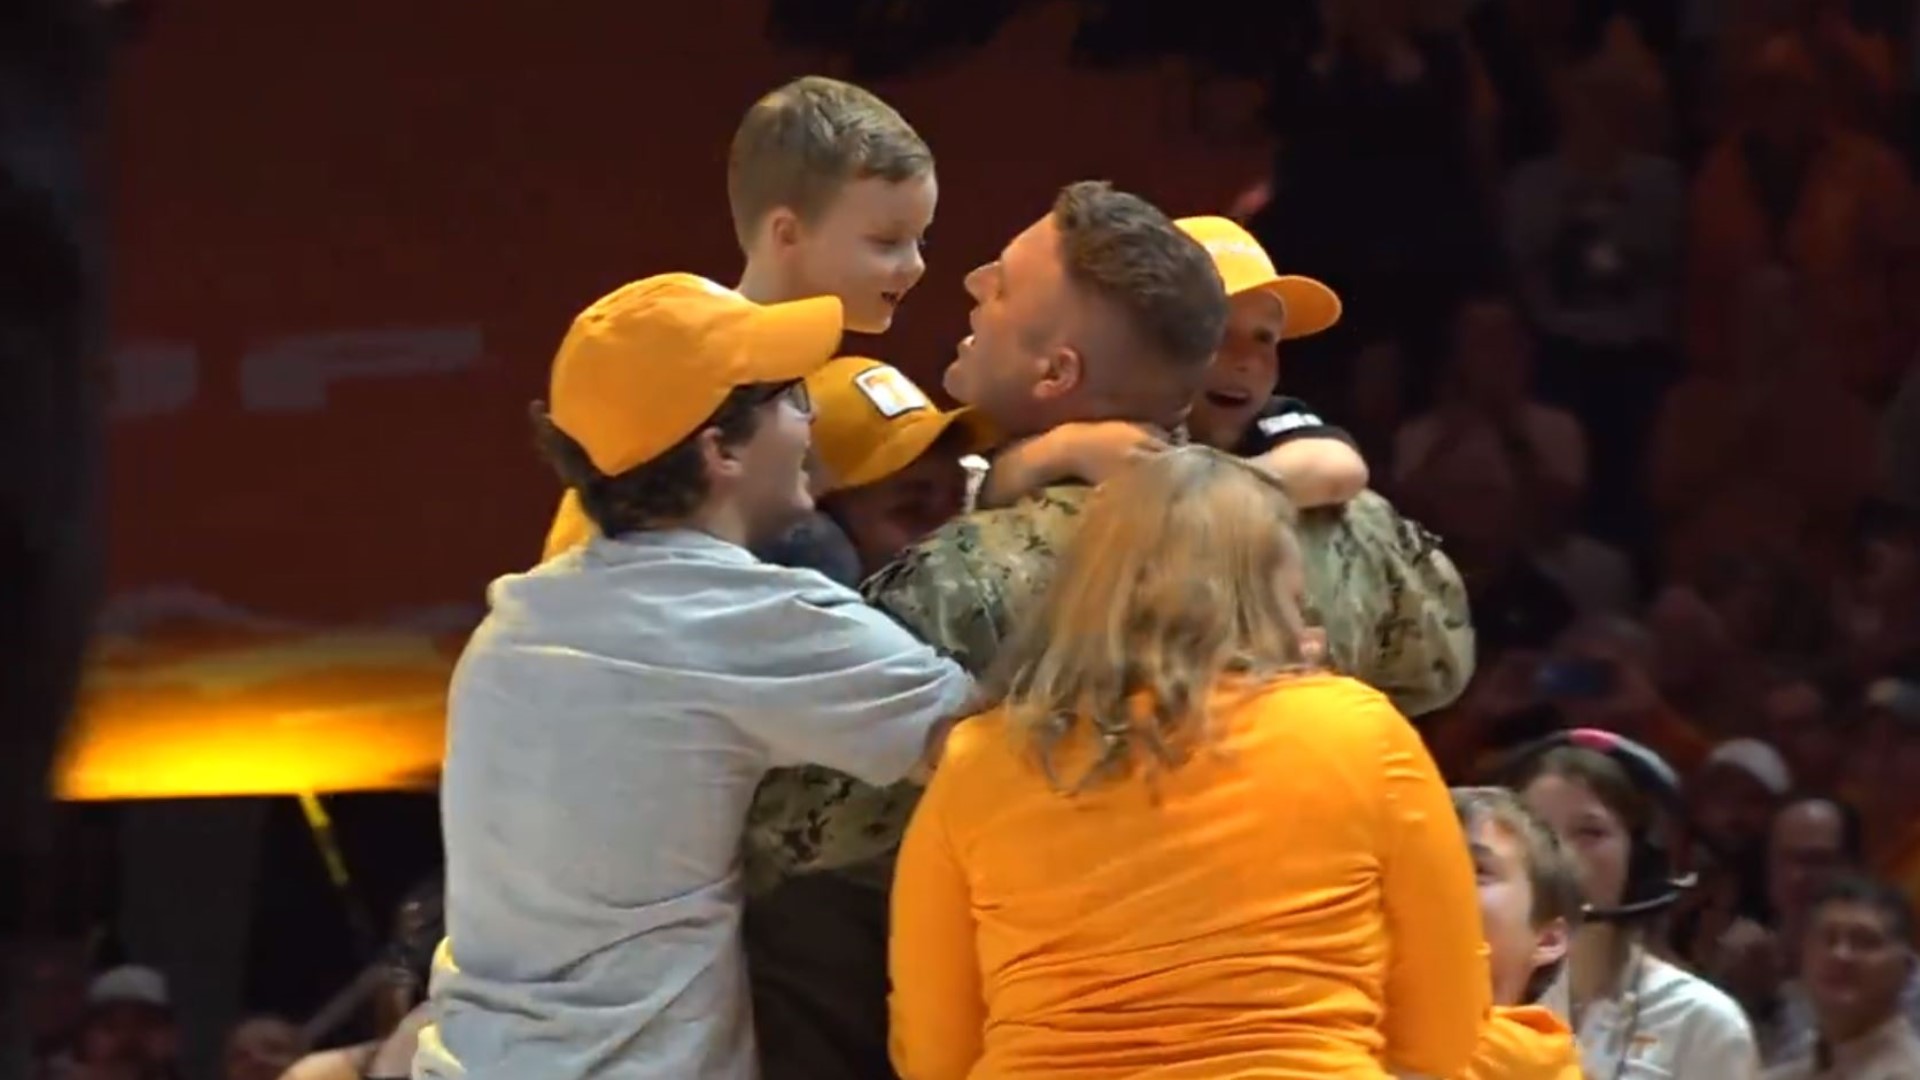 Lieutenant Commander Zachary Smith surprised his family during the Tennessee men's basketball game as they took on Illinois.